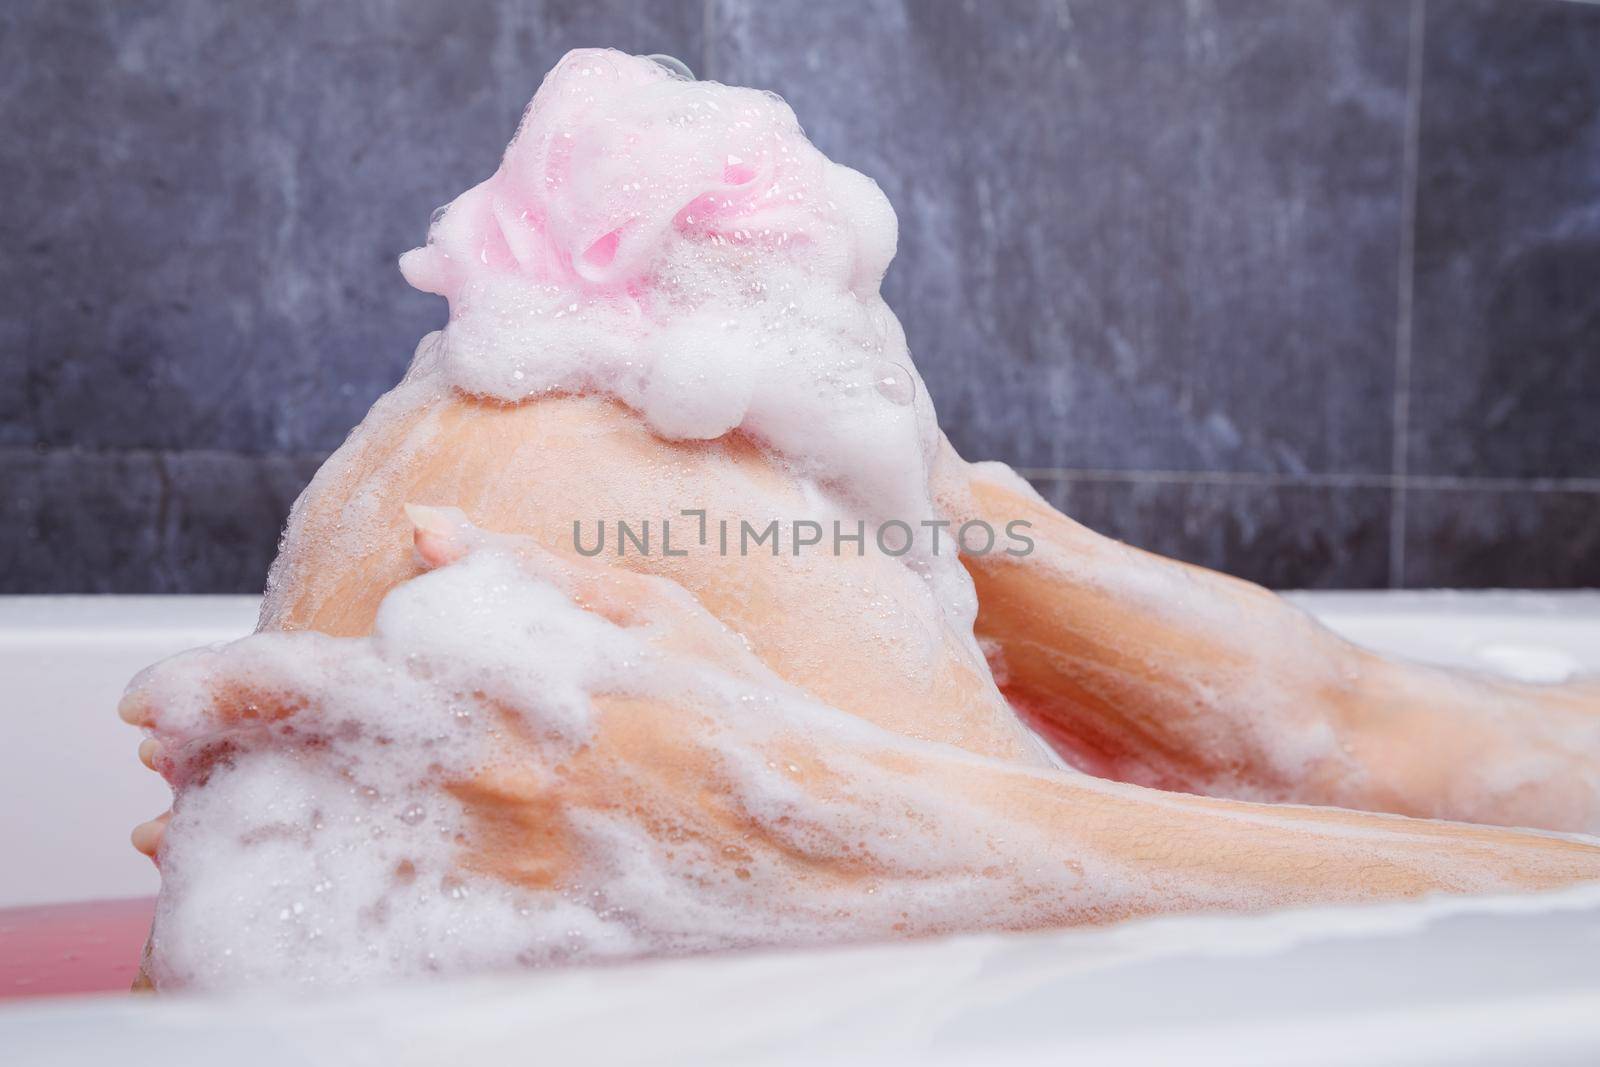 close up of woman washing knee with pink sponge in bathtub in the bathroom